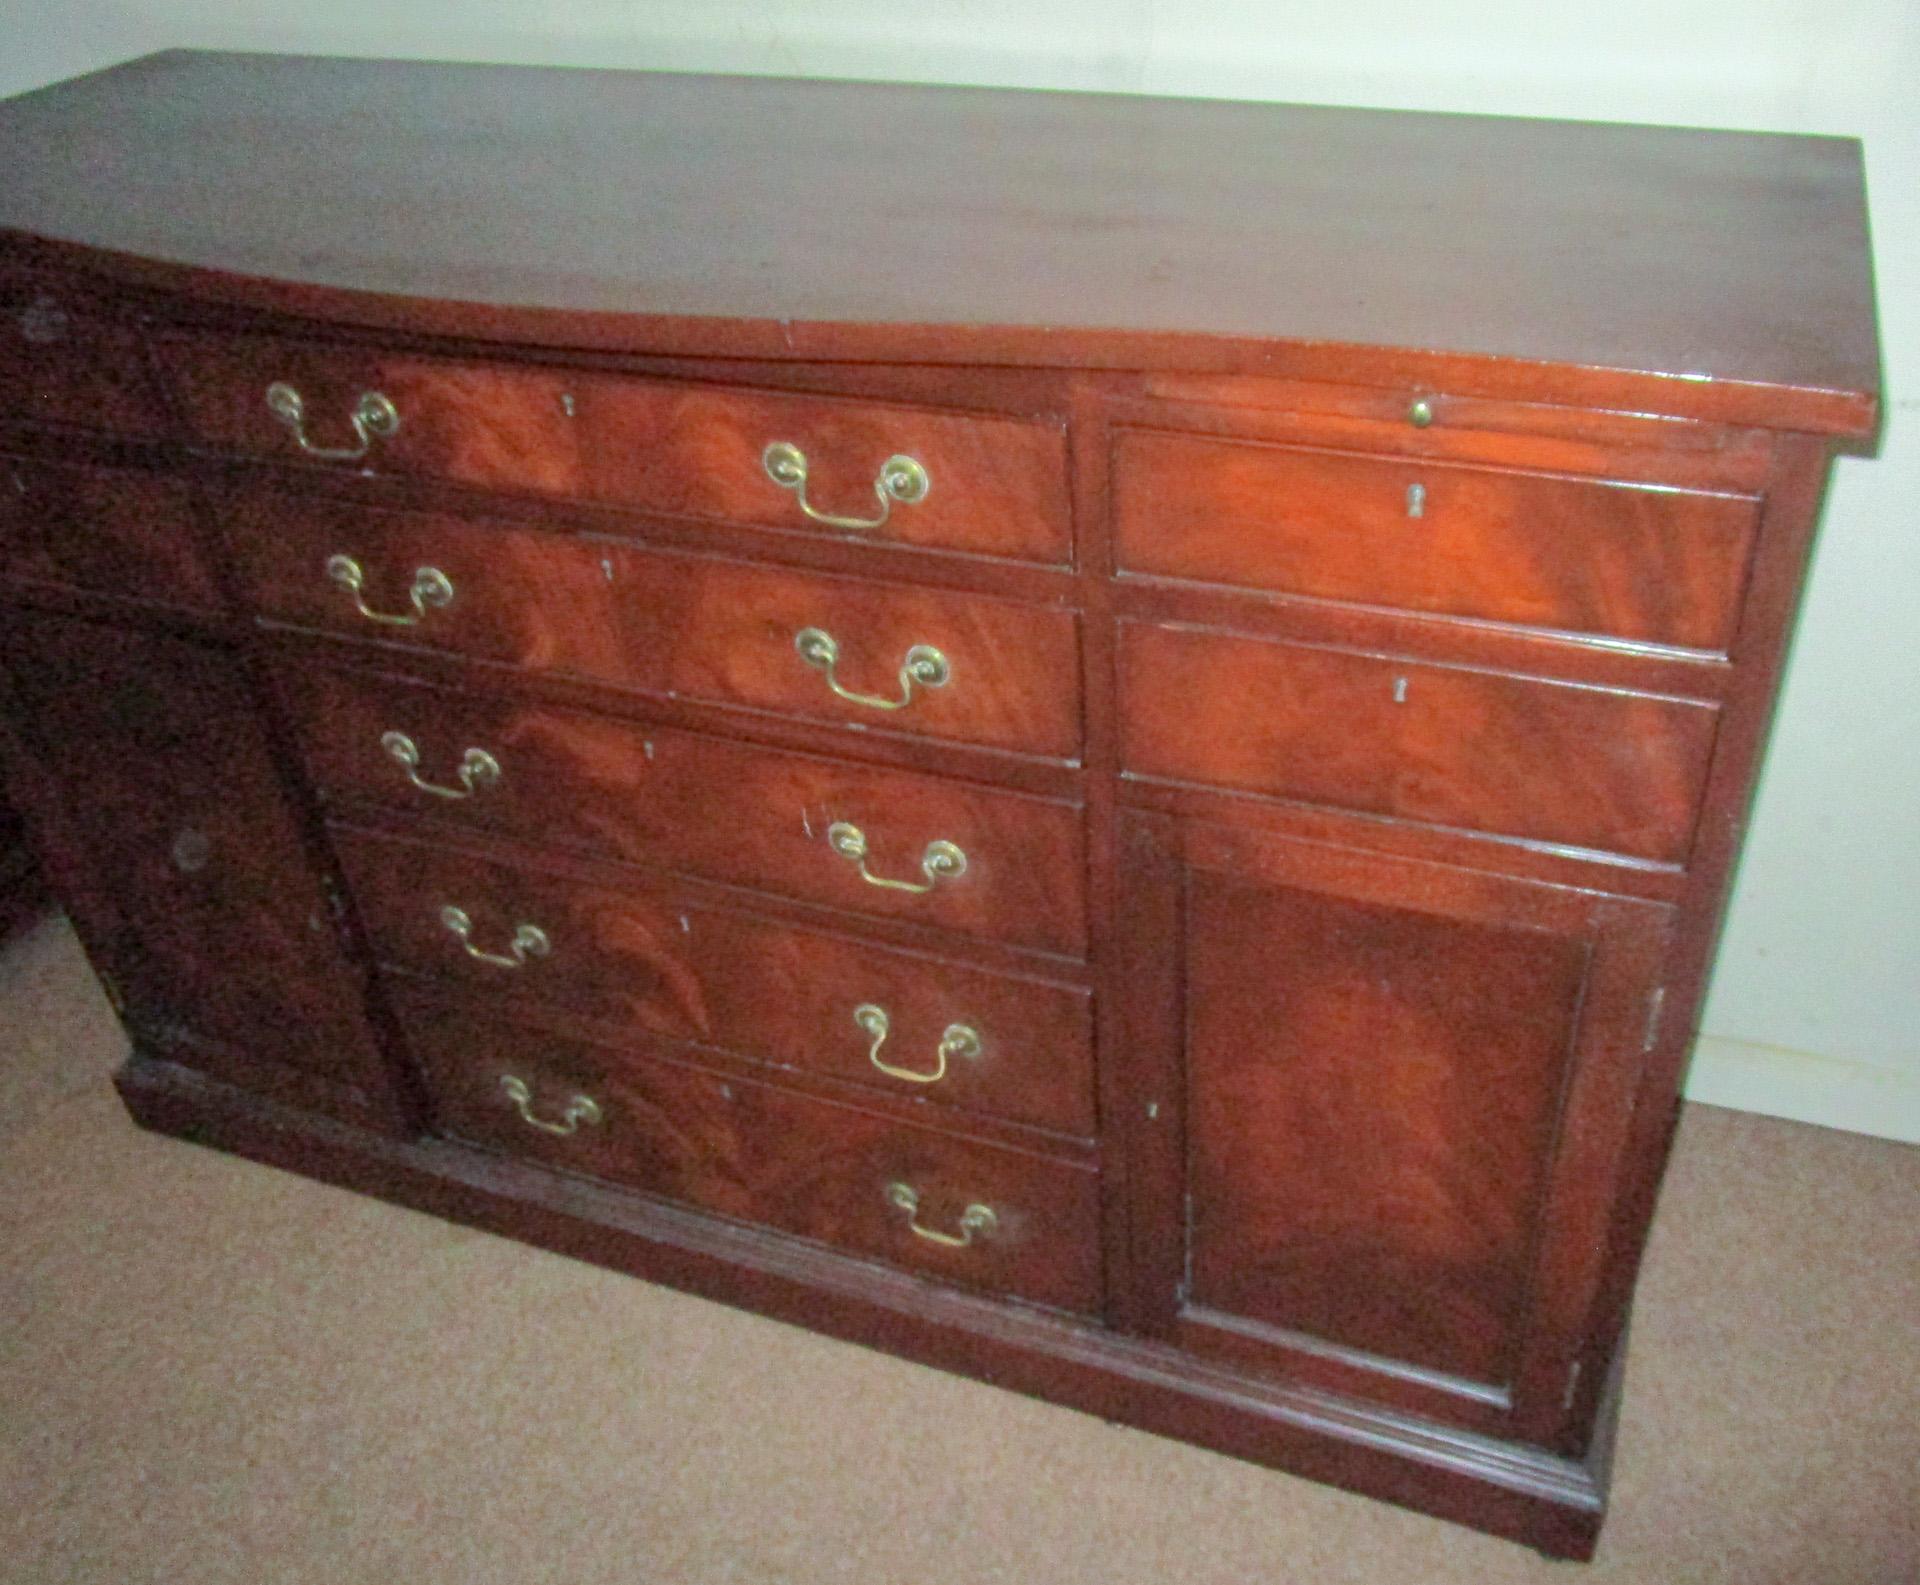 Early 20th Century 20th c American Mahogany Dining Room Server with Custom Silverware Drawers For Sale